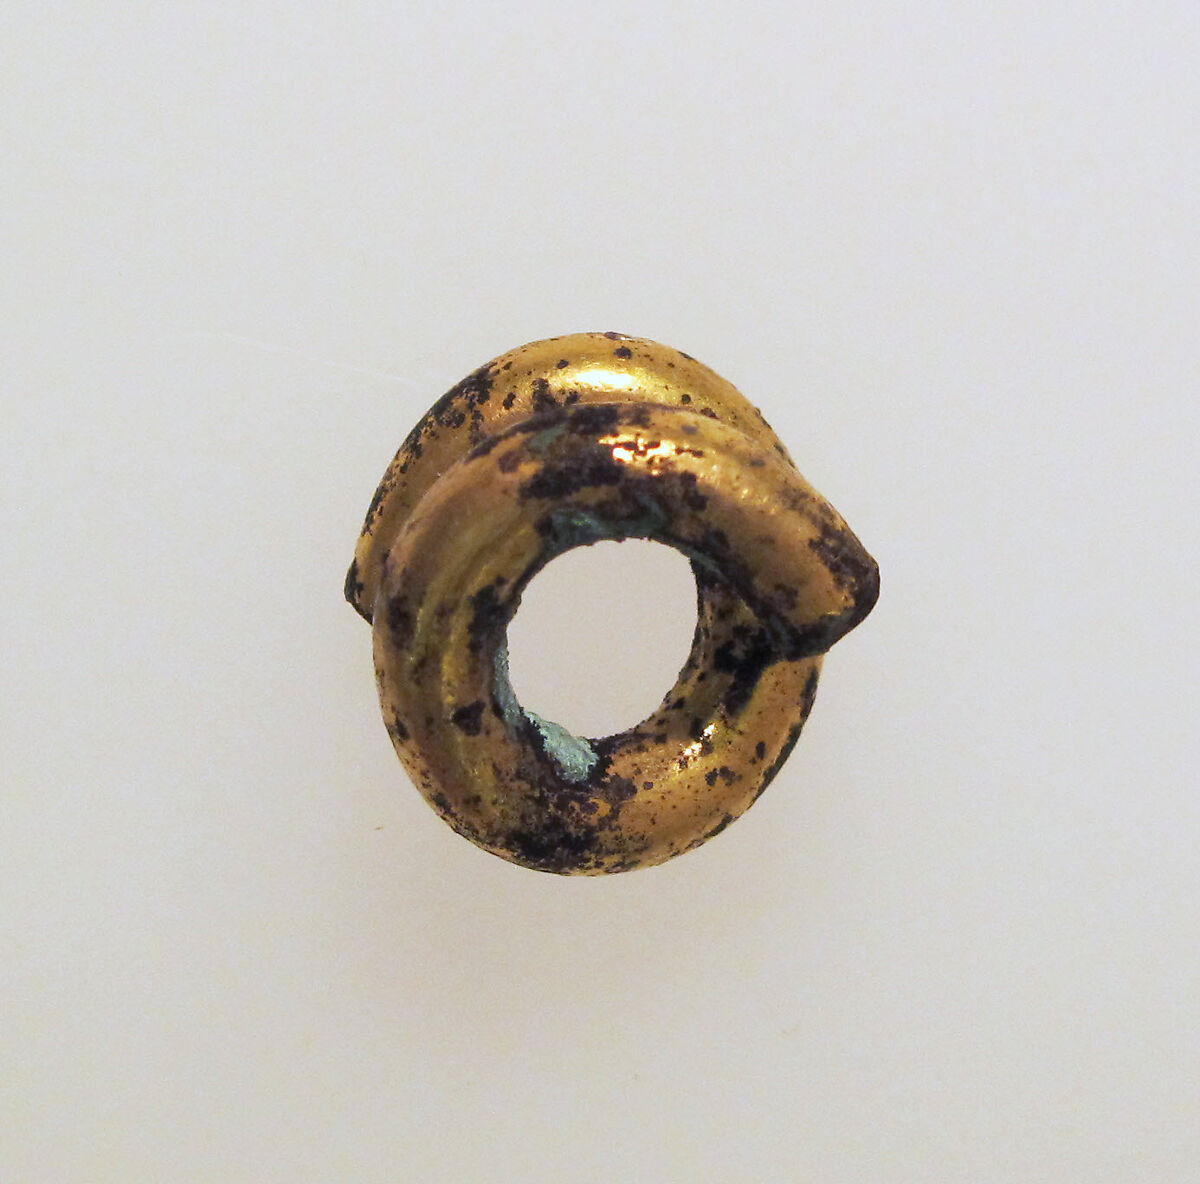 Earring or spiral, Gold, bronze, Cypriot 